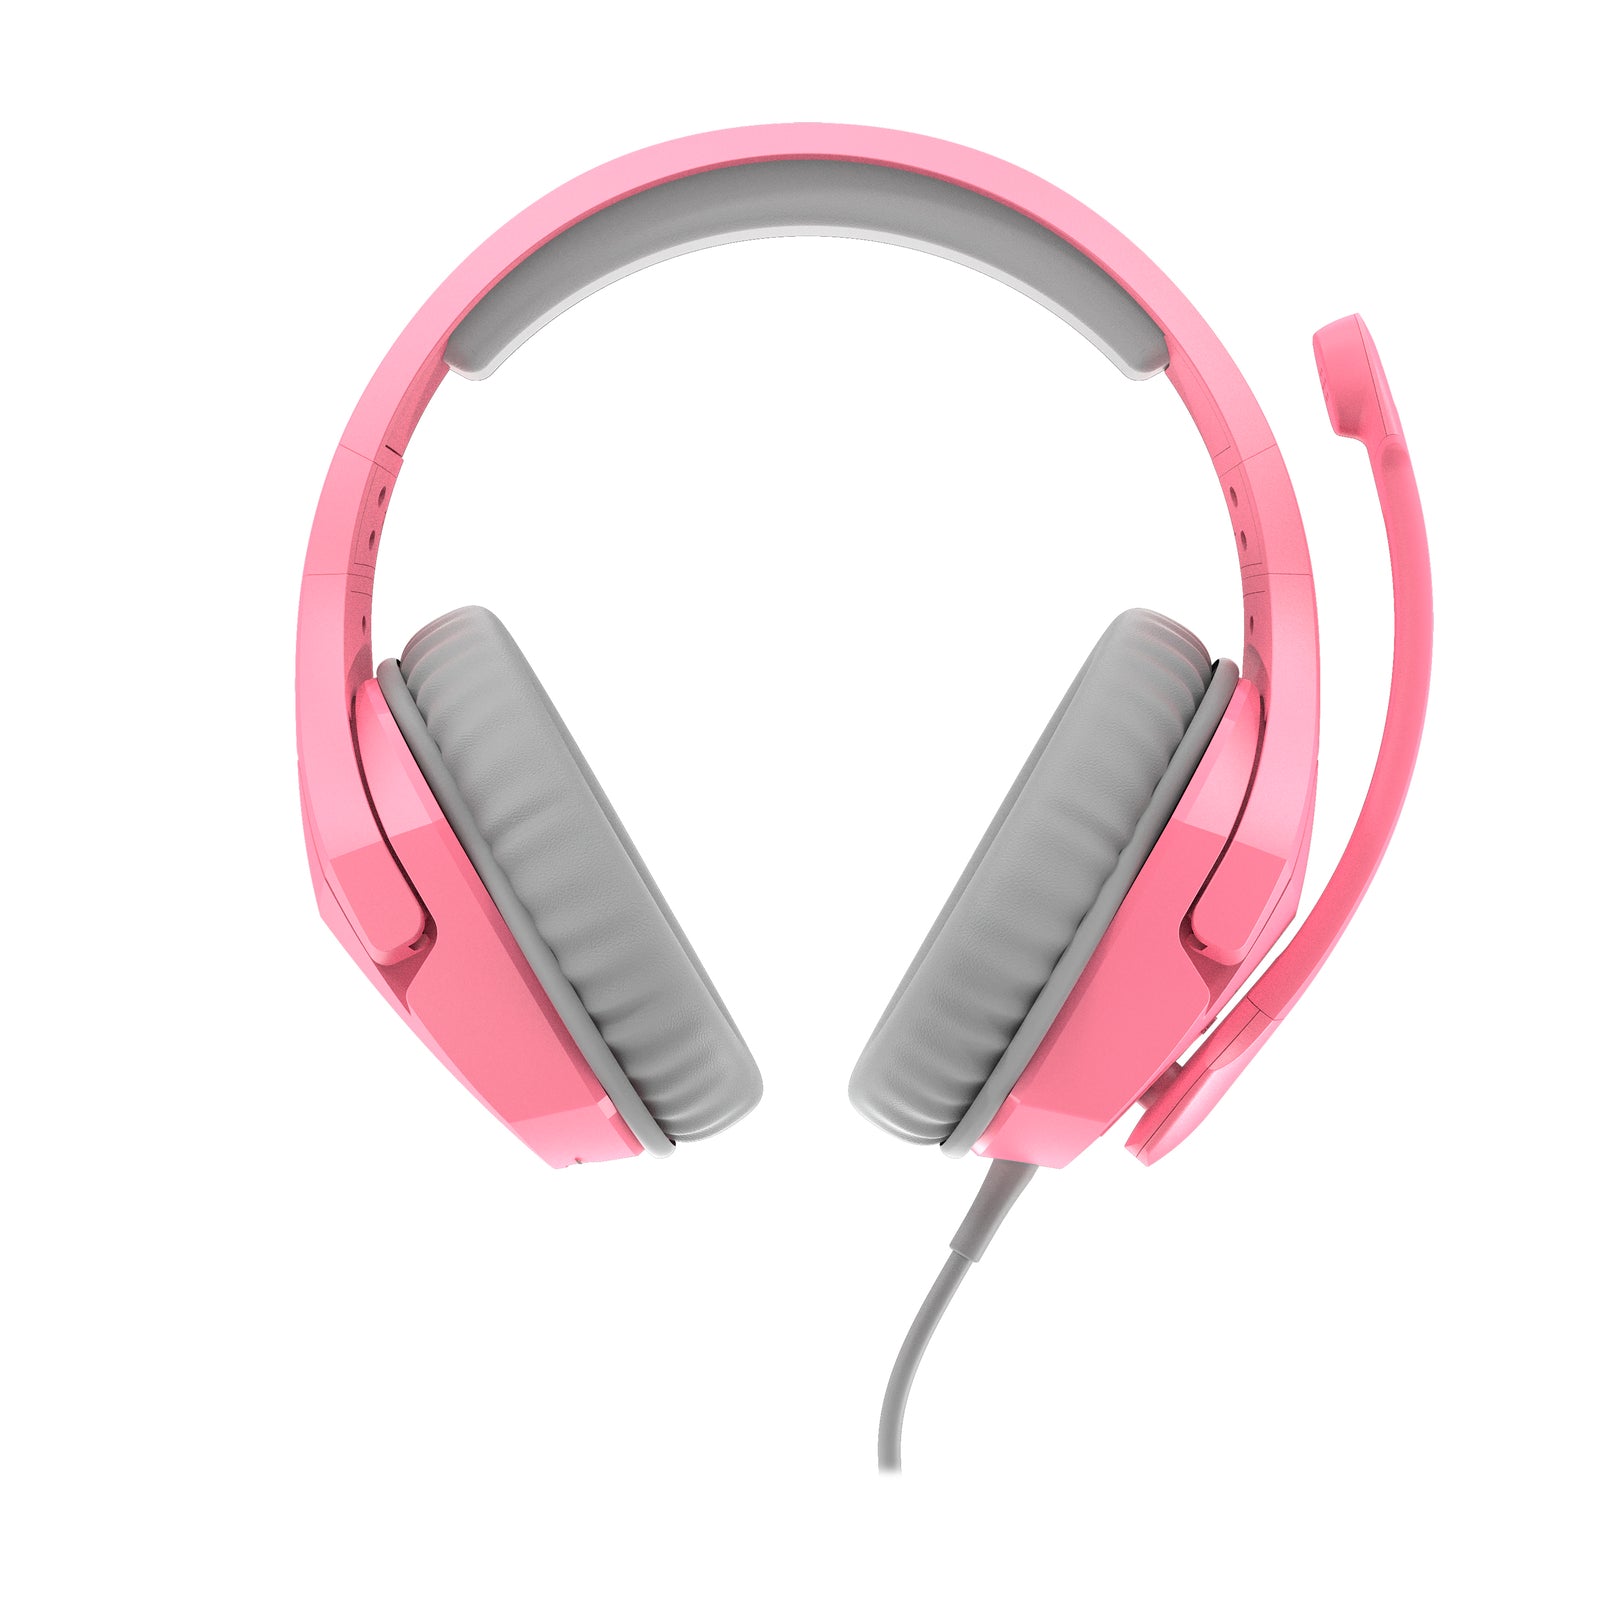 HyperX Cloud Stinger Pink Gaming Headset Main front view